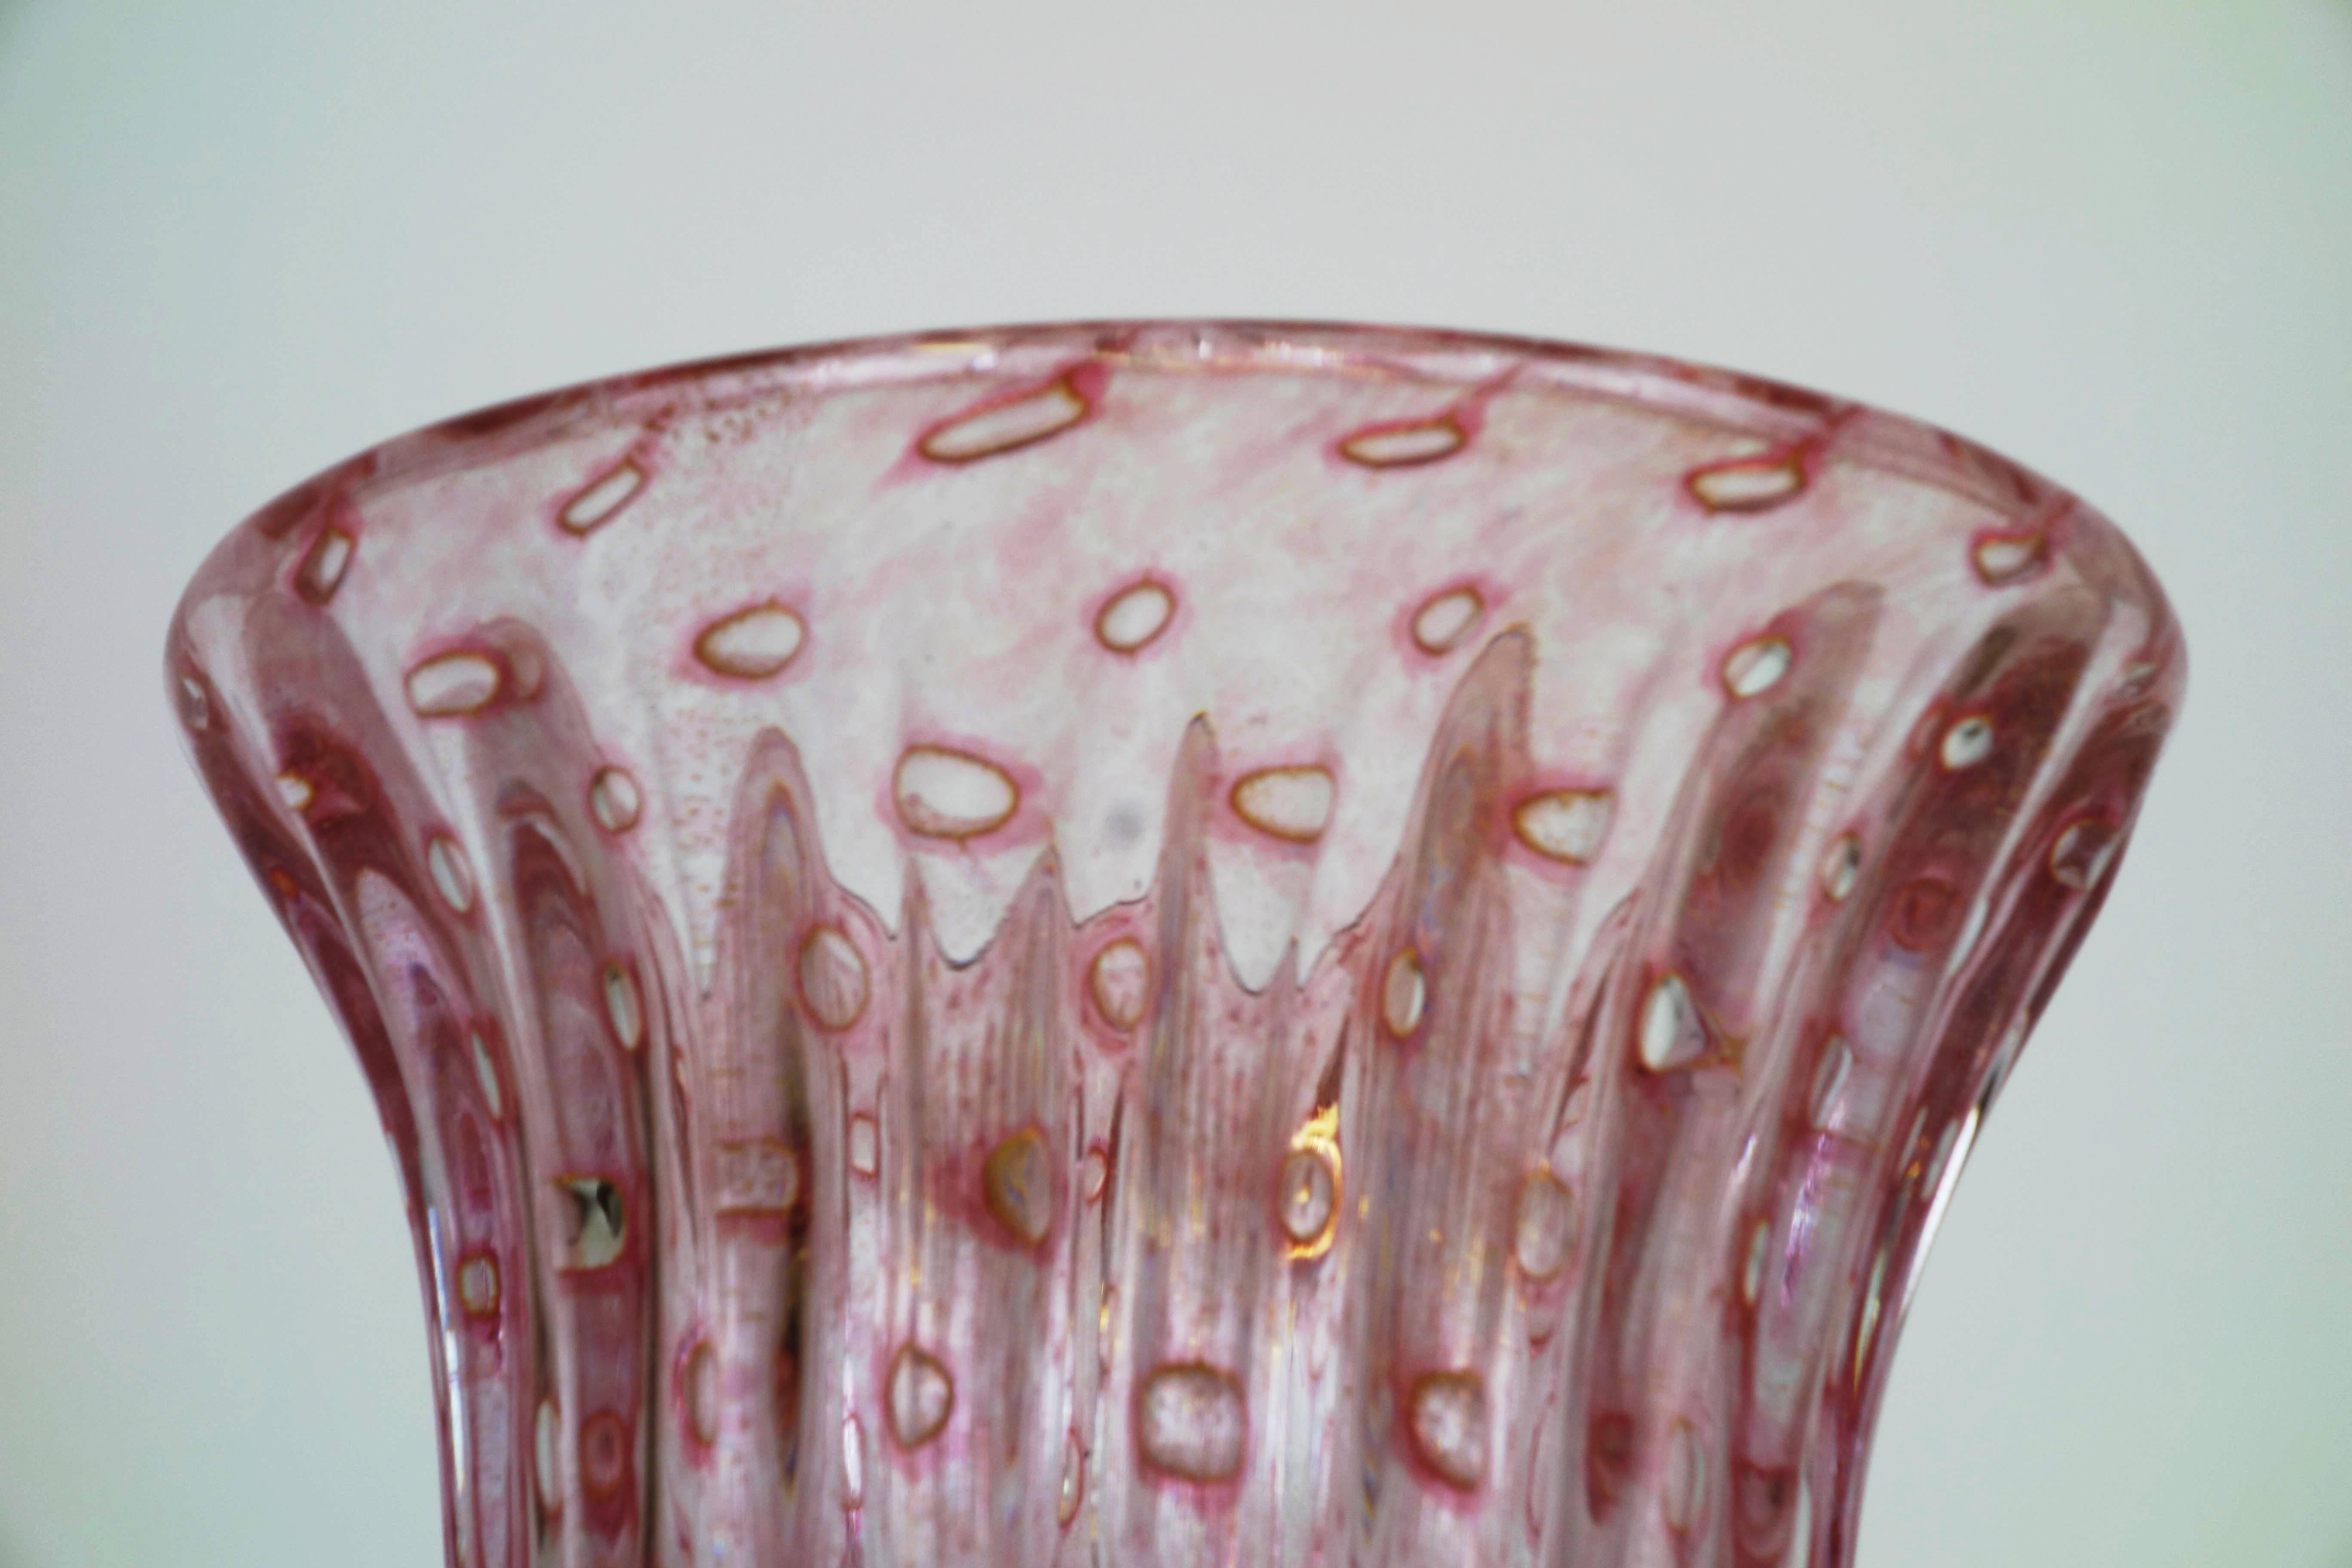 Italian Handblown Fluted Murano Glass Vase by Fratelli Toso, Murano, Italy, 1950s For Sale